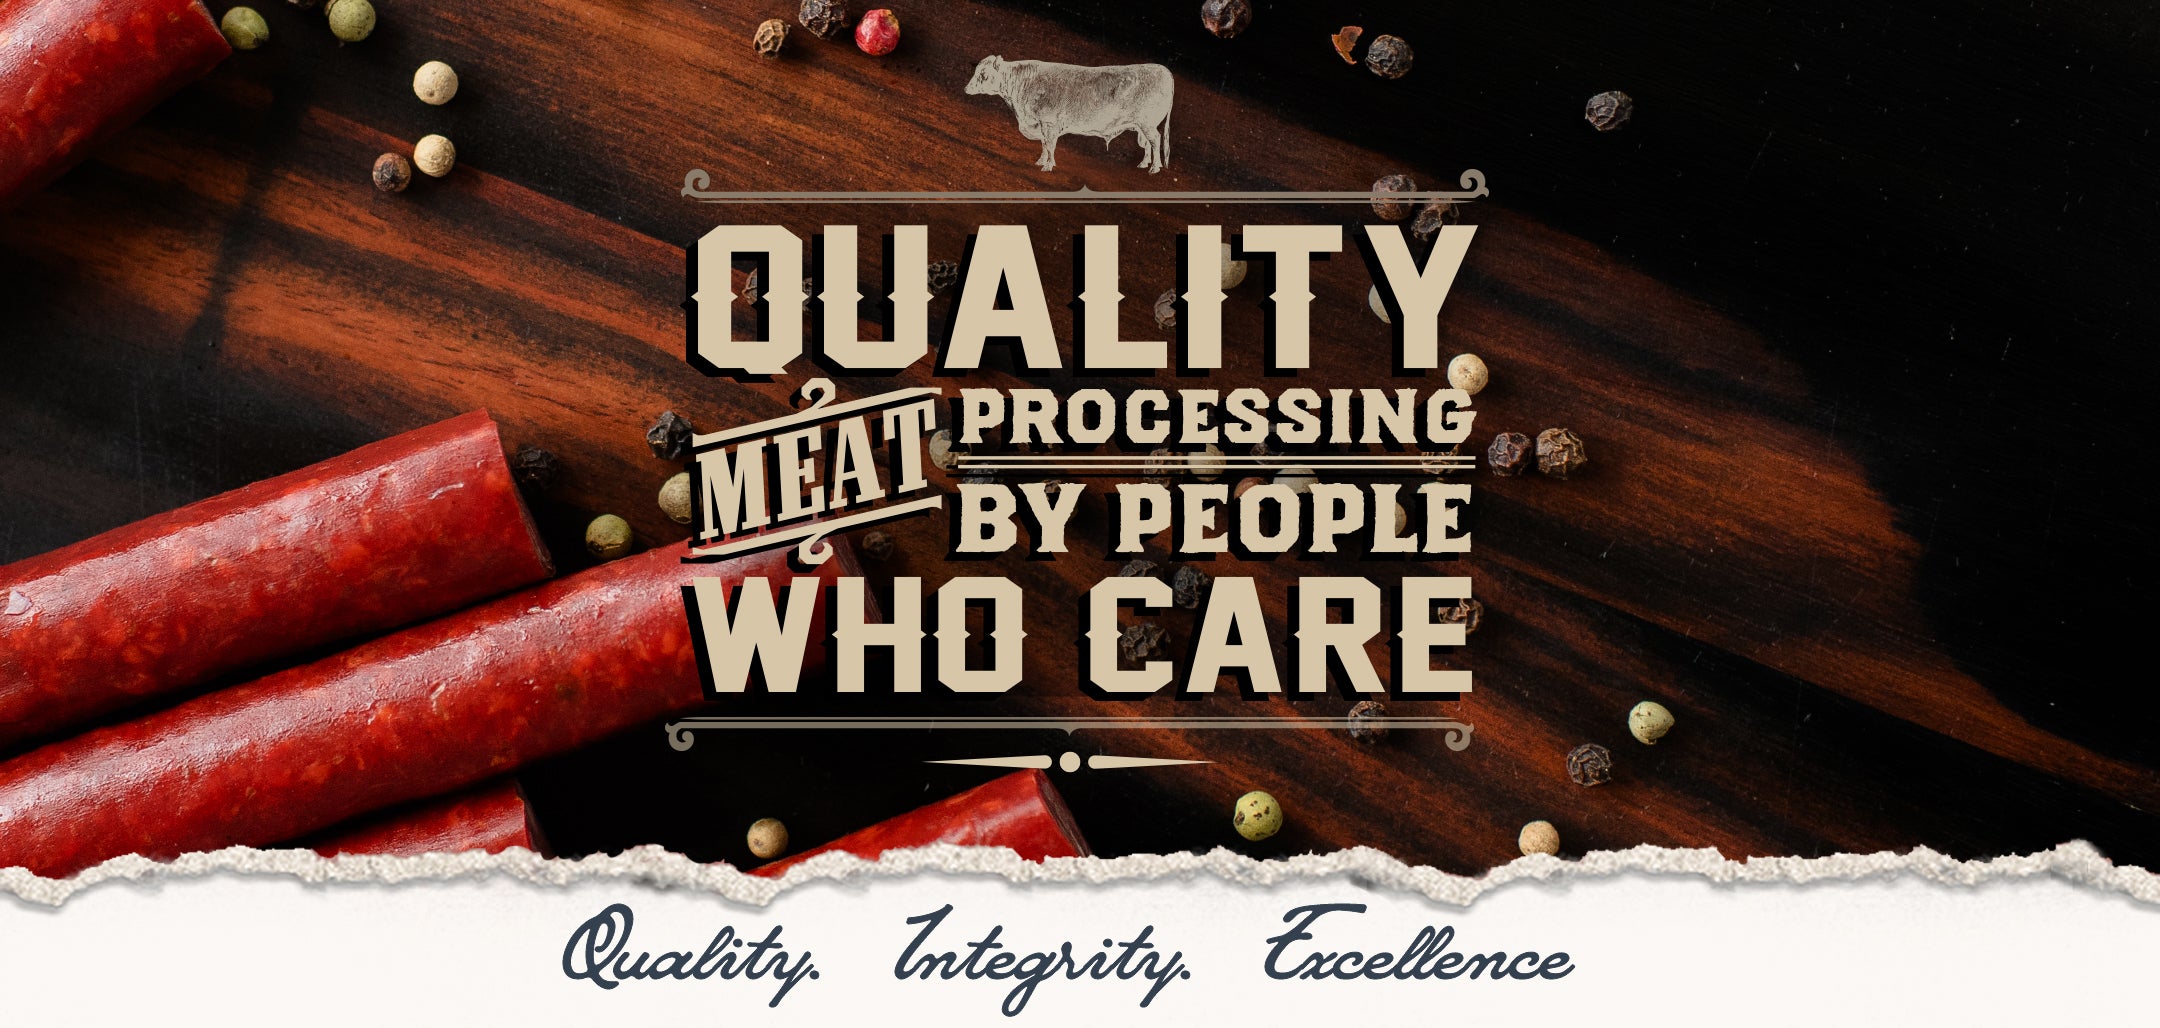 Red Plains Grand Butchery online meat snacks and animal processing plant in Oklahoma. 